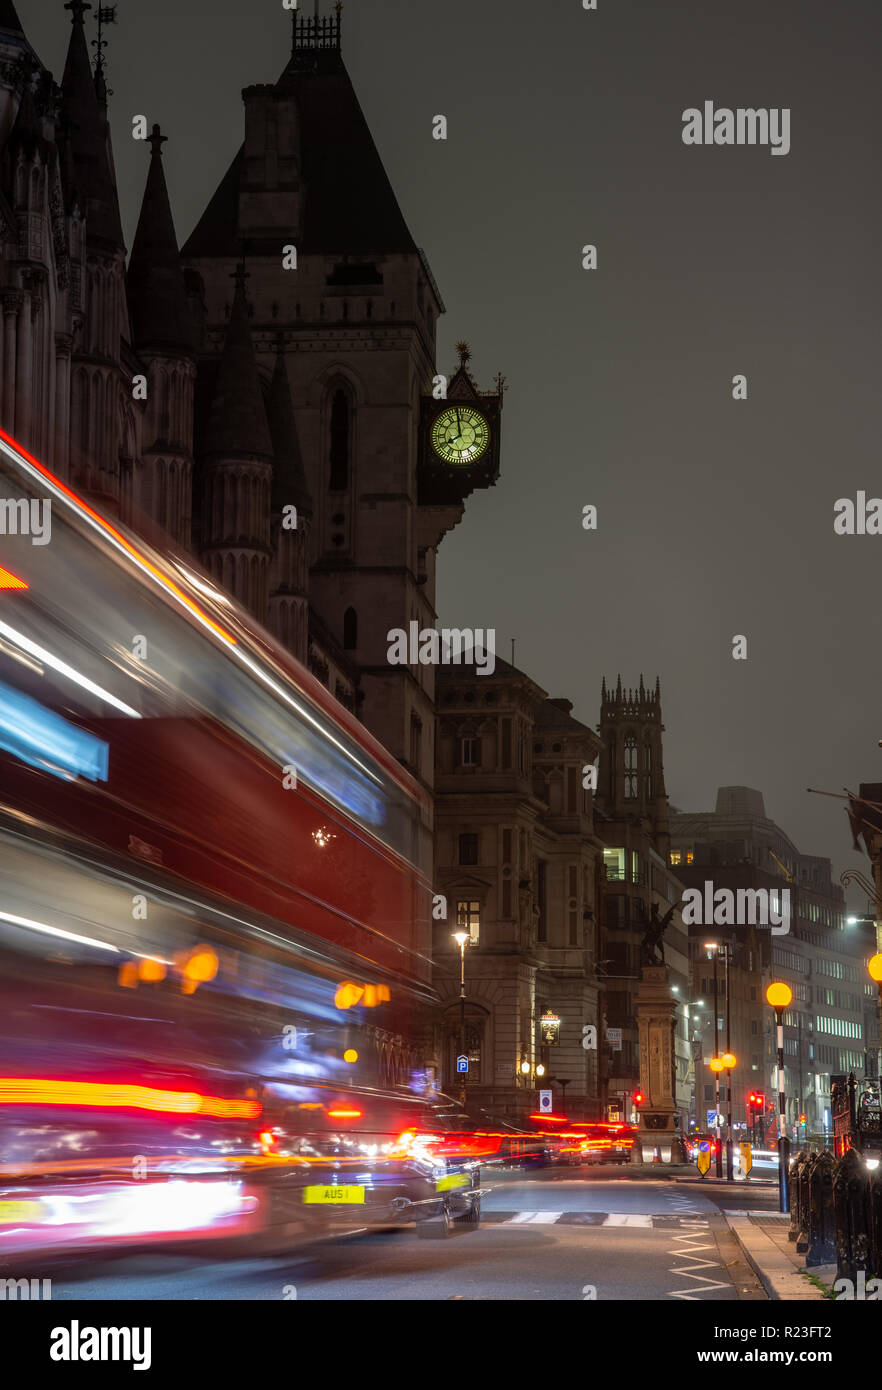 London, England, UK - October 15, 2018: A red double-decker bus leaves light trails as it moves along Fleet Street outside the Royal Courts of Justice Stock Photo